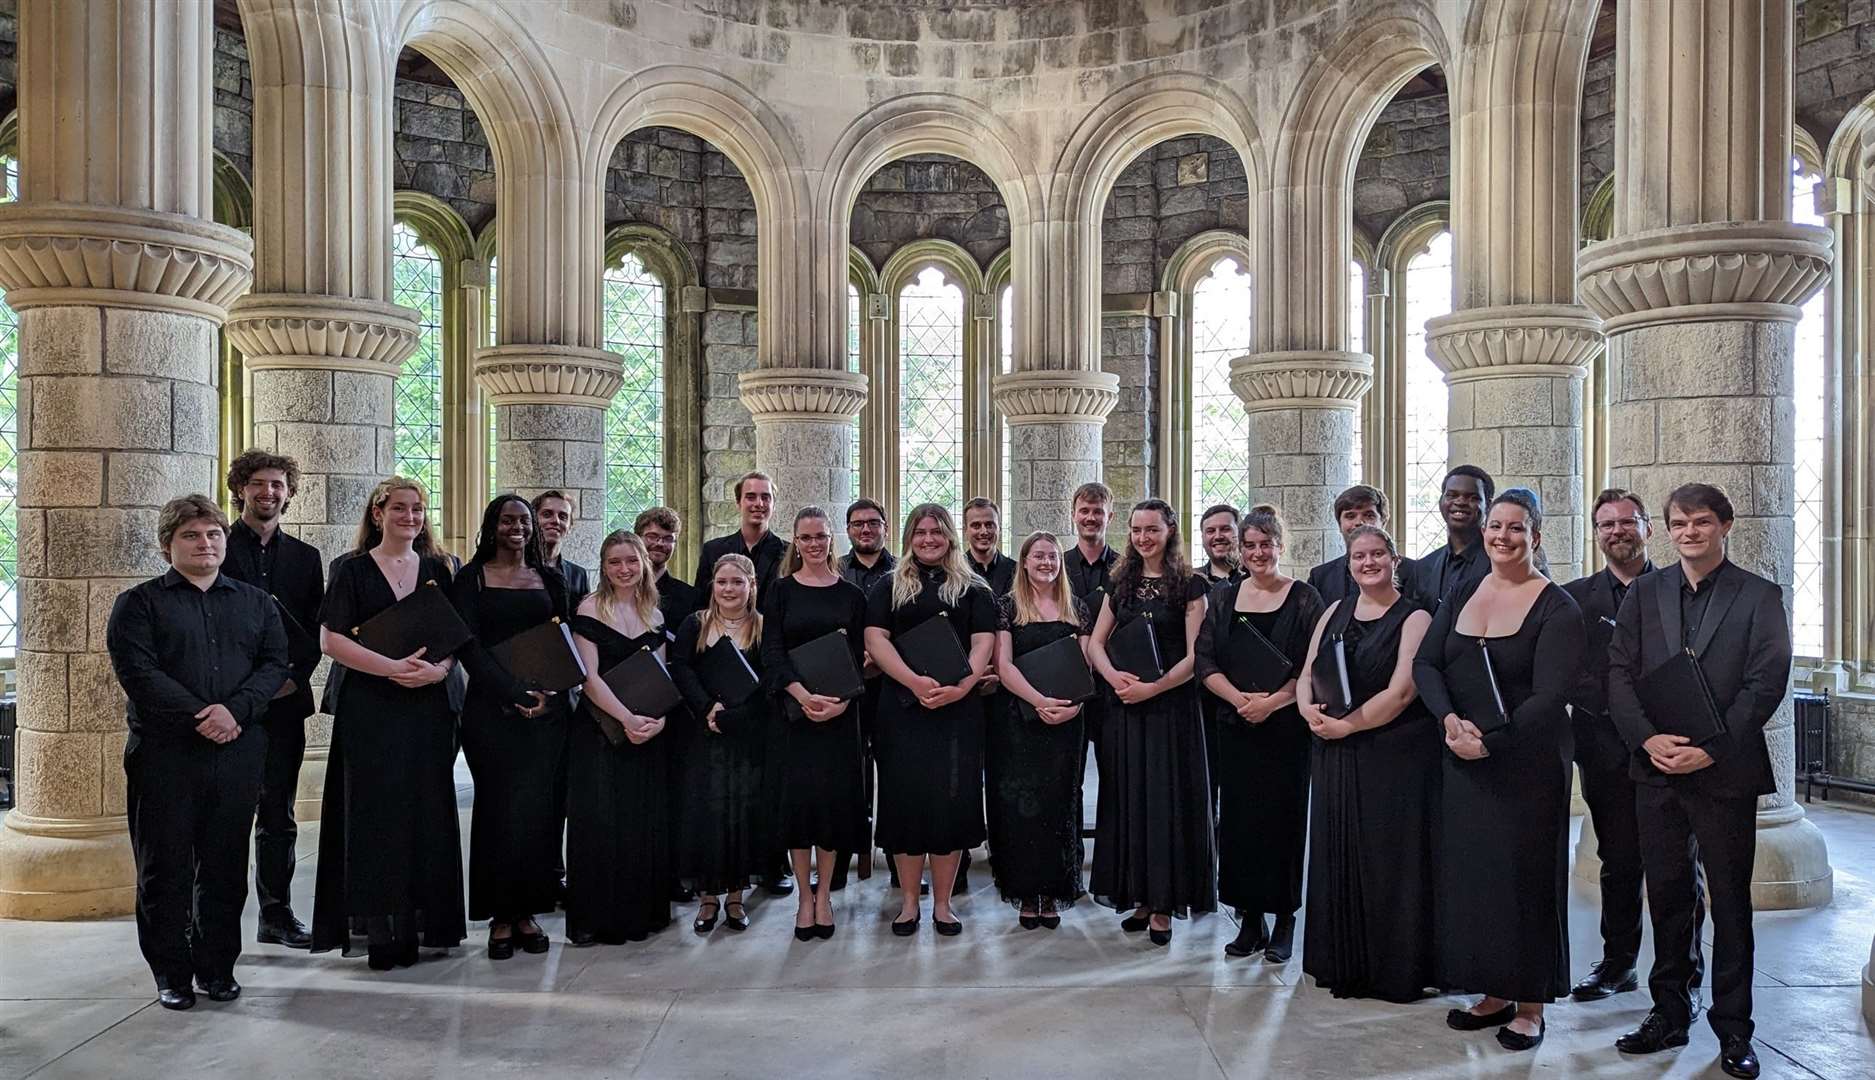 The choir specialises in contemporary choral music, and in particular aims to champion compositions by current and former students of the university.